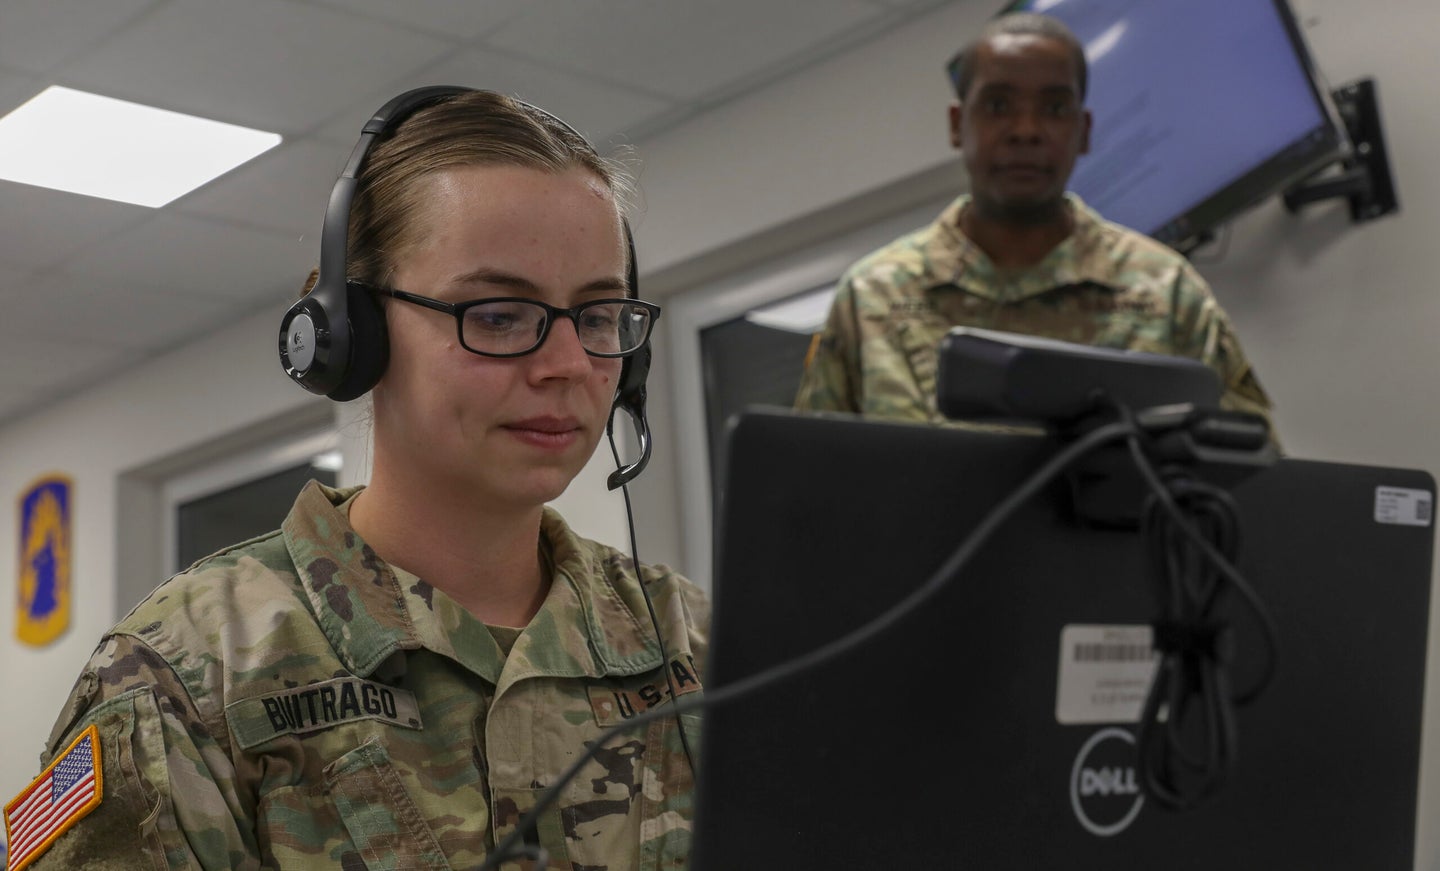 The Army is eliminating 346 hours of online courses that soldiers were required to complete in order to be promoted, Sergeant Major of the Army announced Wednesday. Photo by Spc. Zachary Stahlberg.